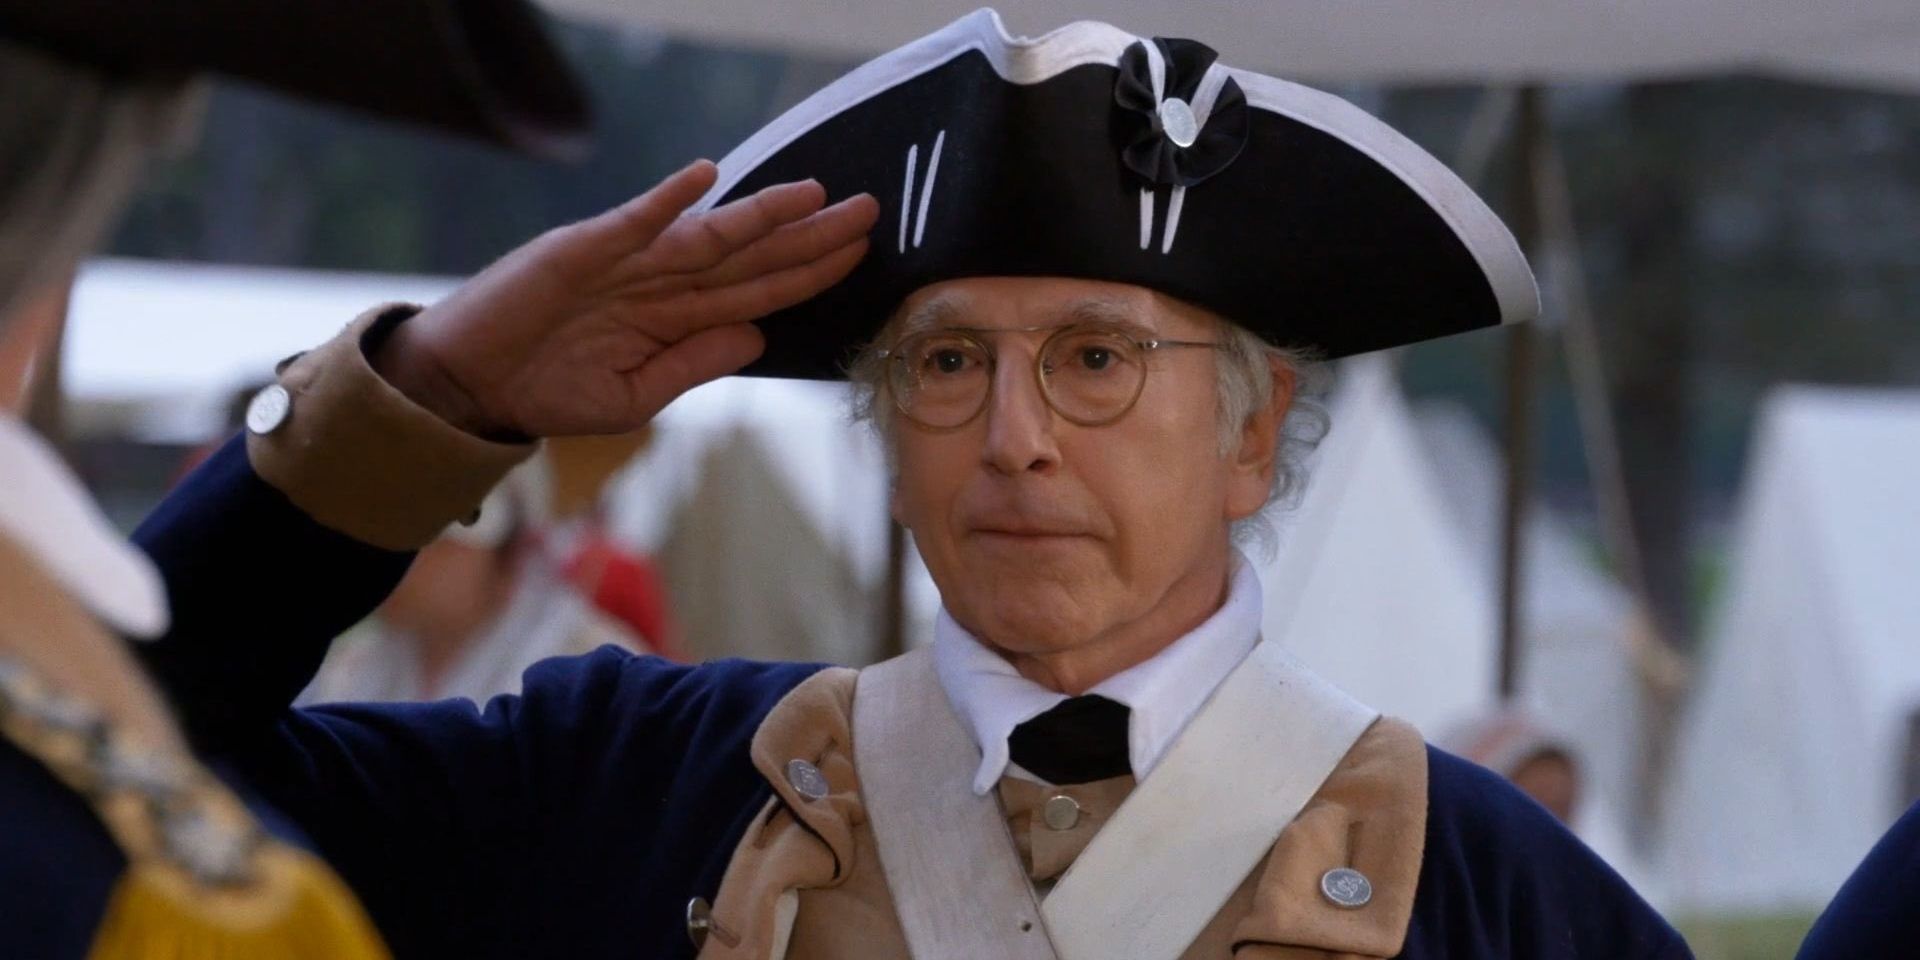 Larry salutes in a military uniform in Curb Your Enthusiasm